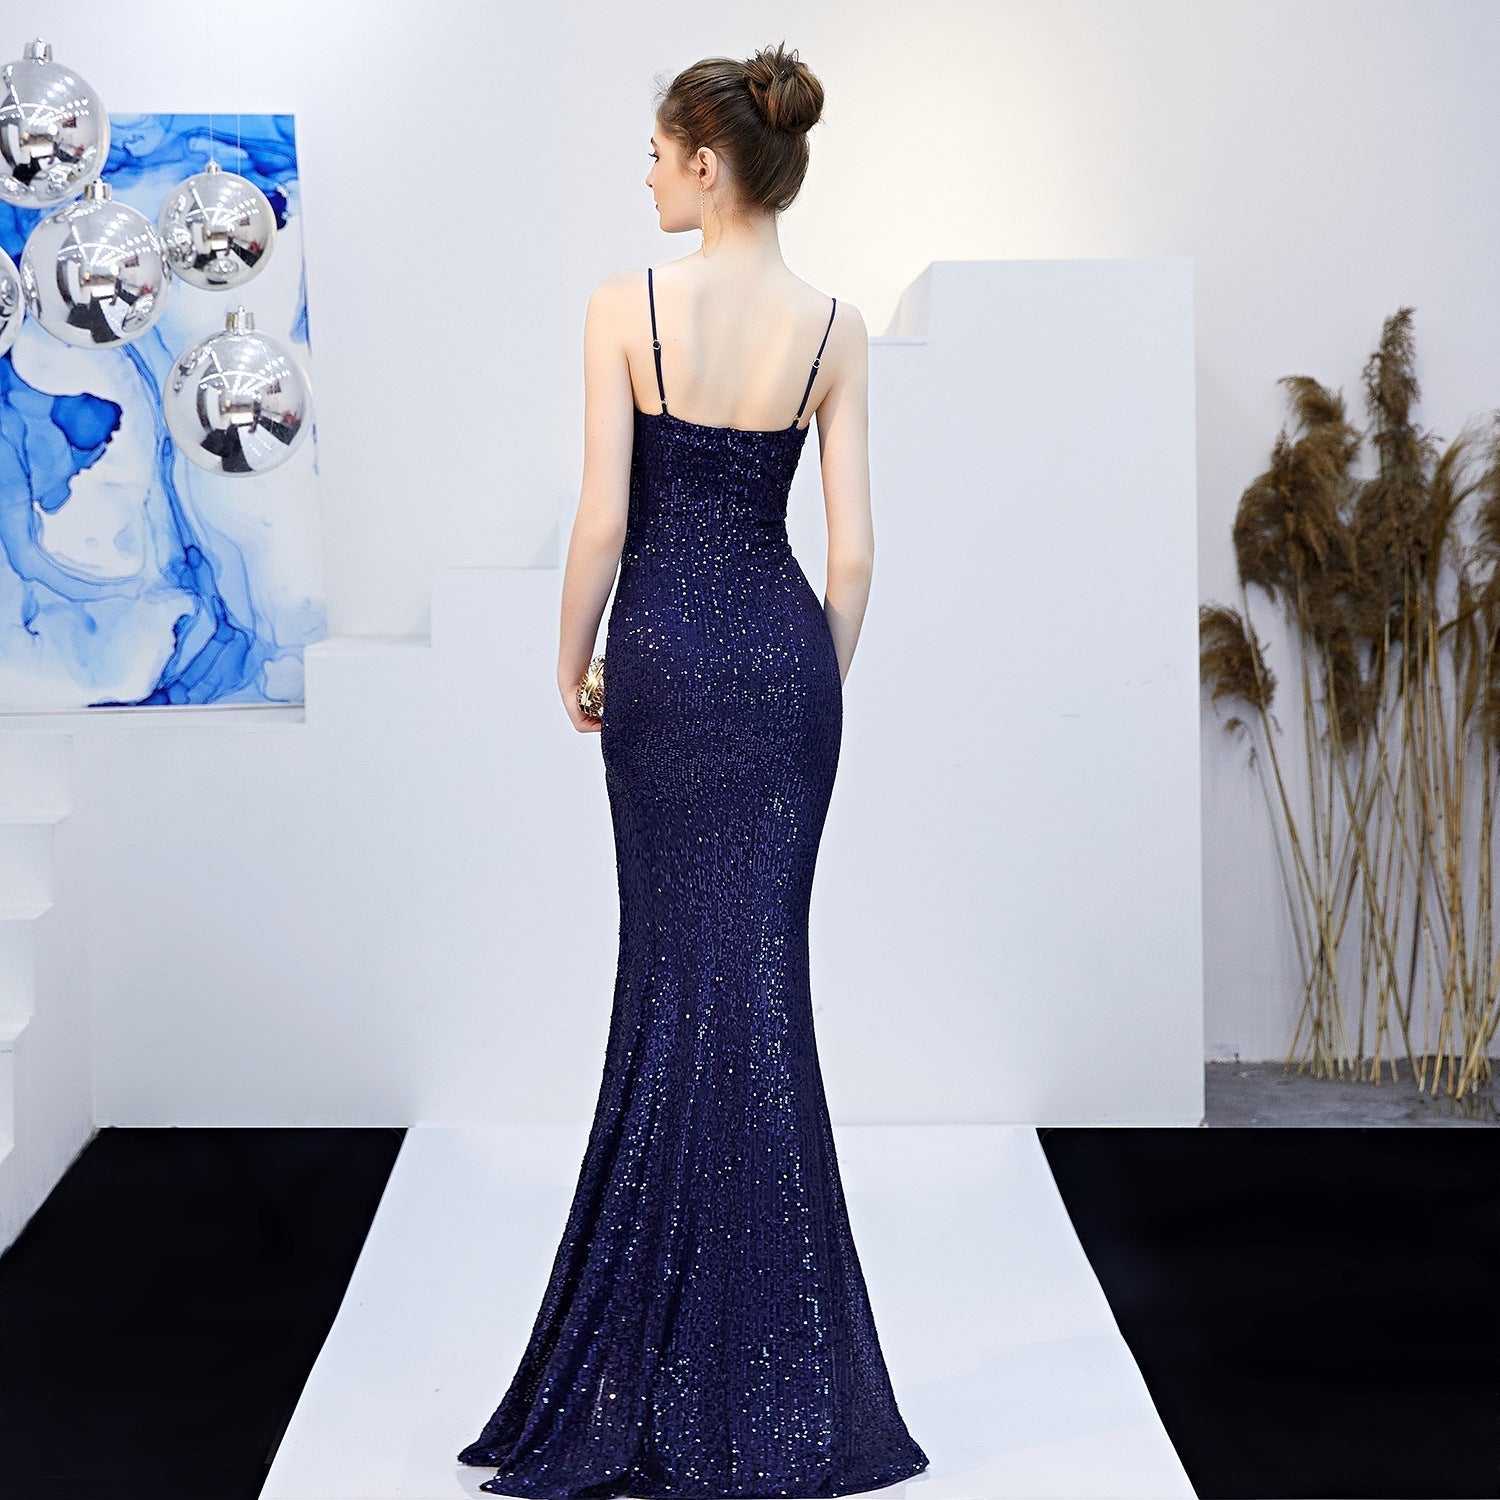 Emma sequined Formal slit dress - Lady Occasions